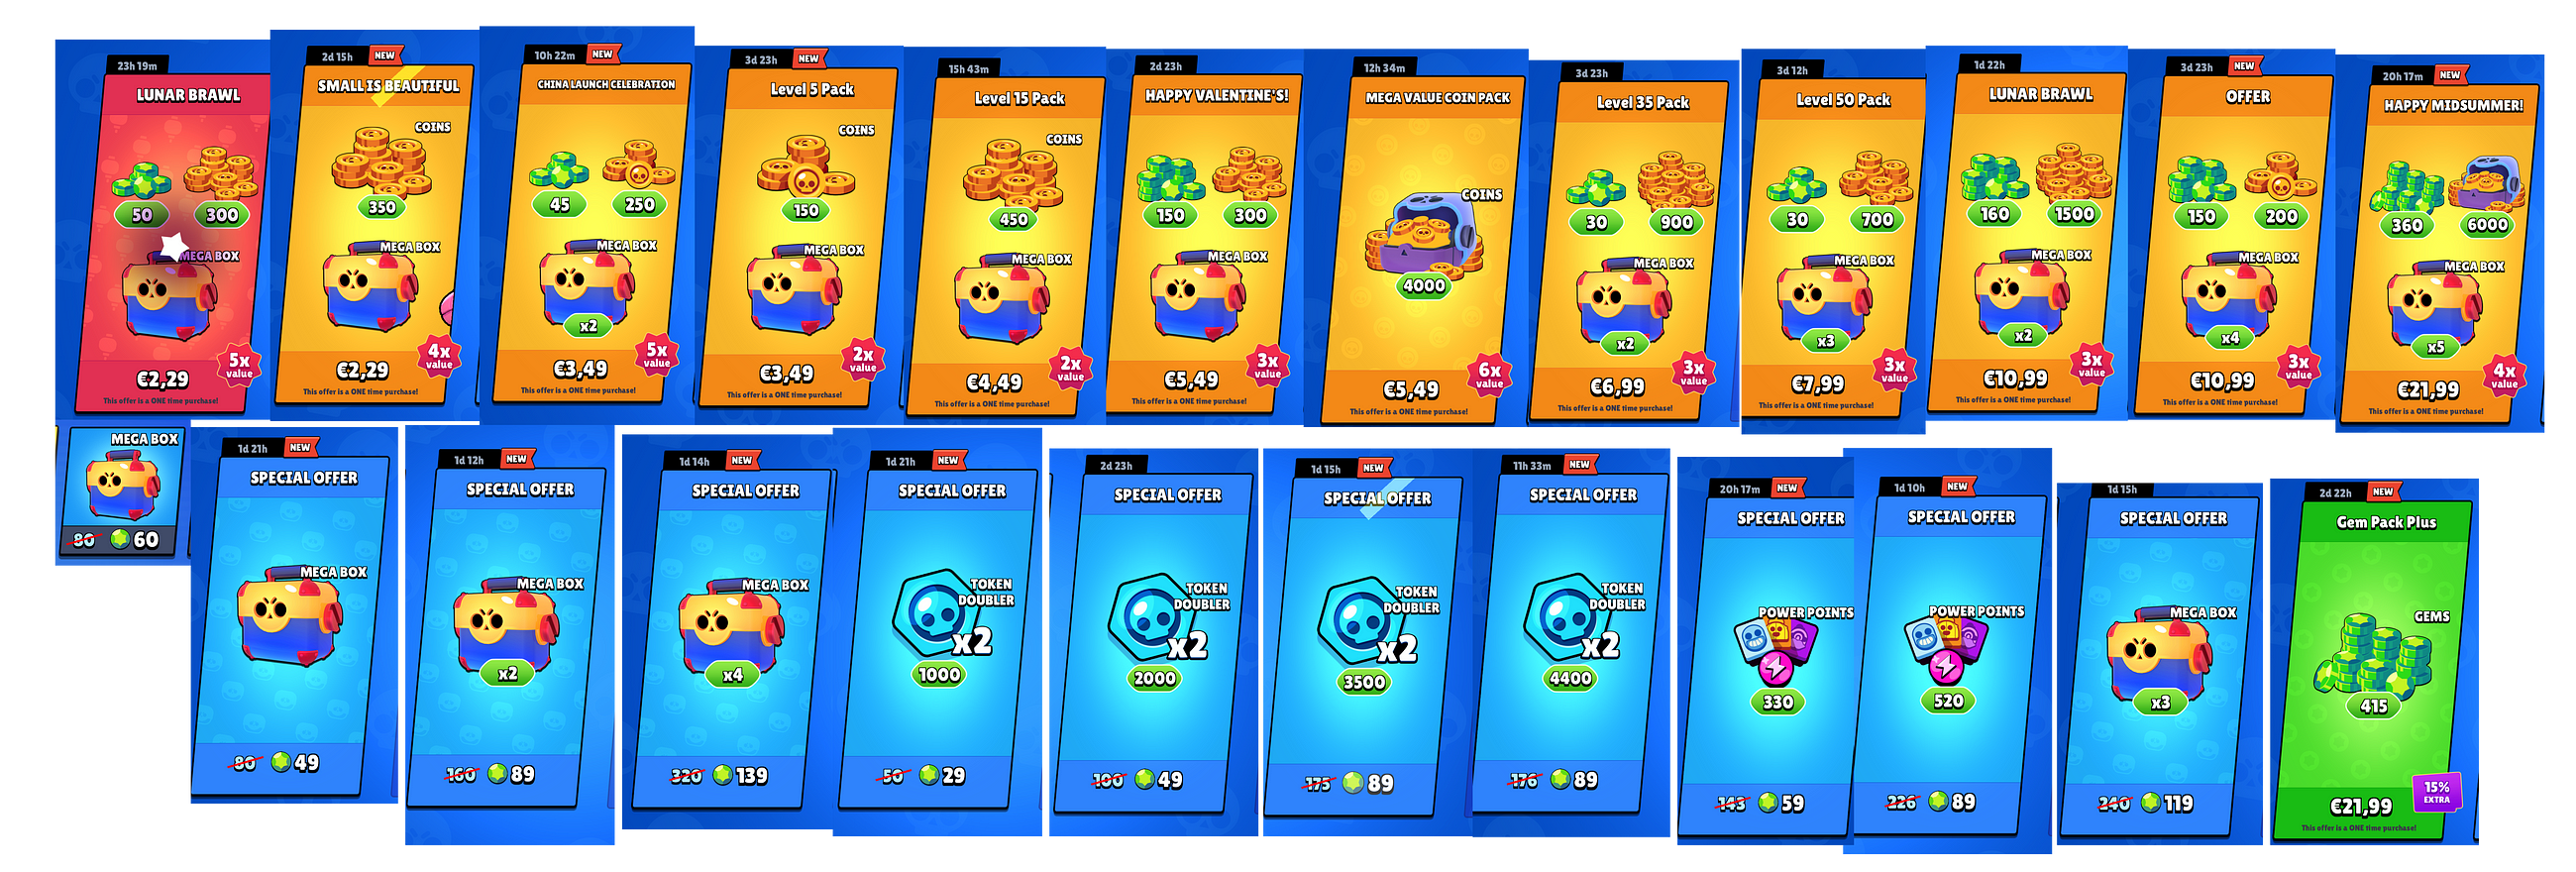 2ndpotion Level Up 3 - brawl stars offers